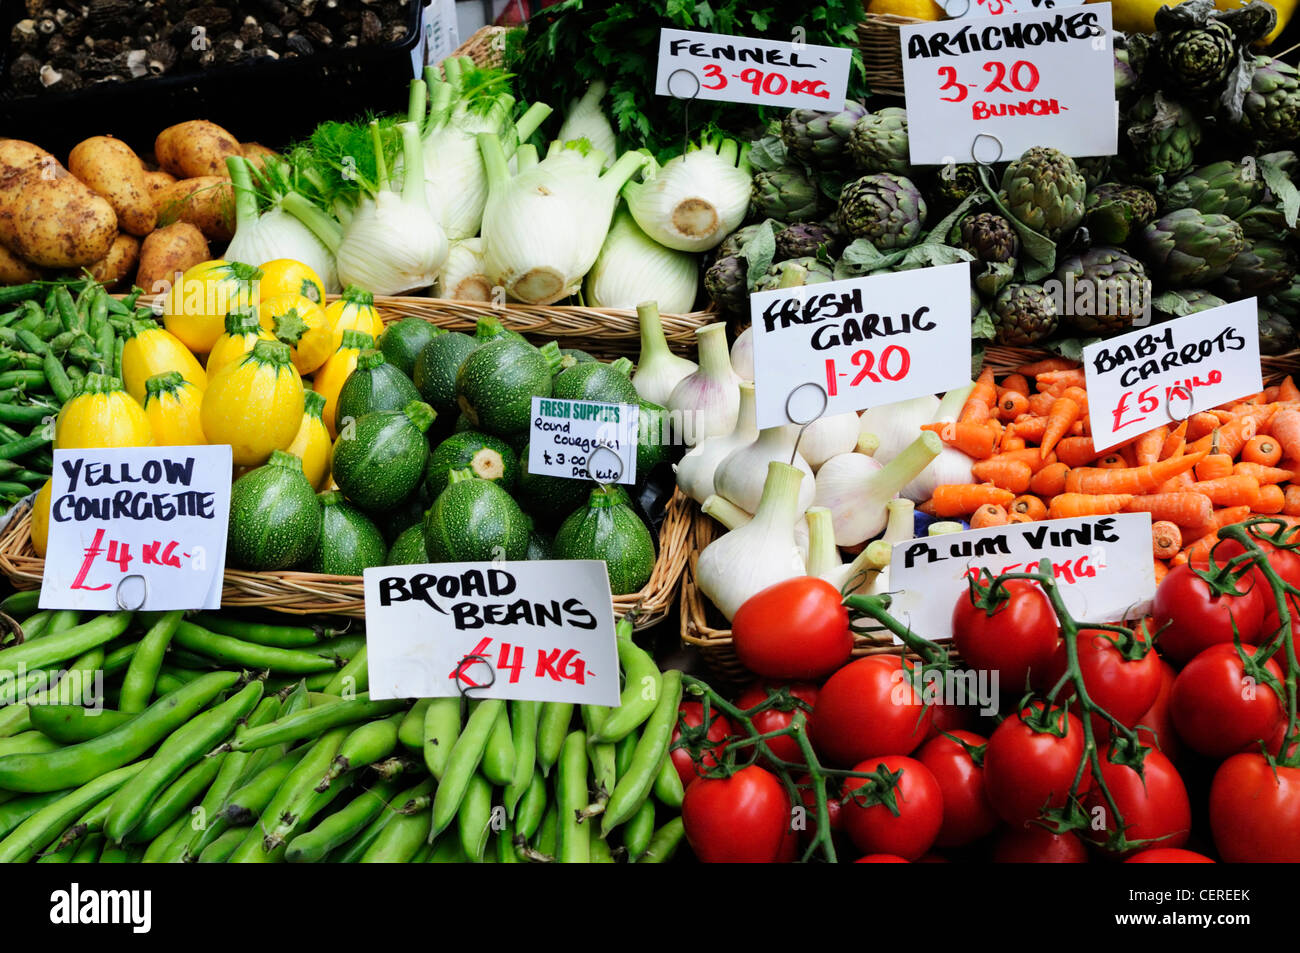 Vegetables for sale from a stall at Borough Market. Stock Photo